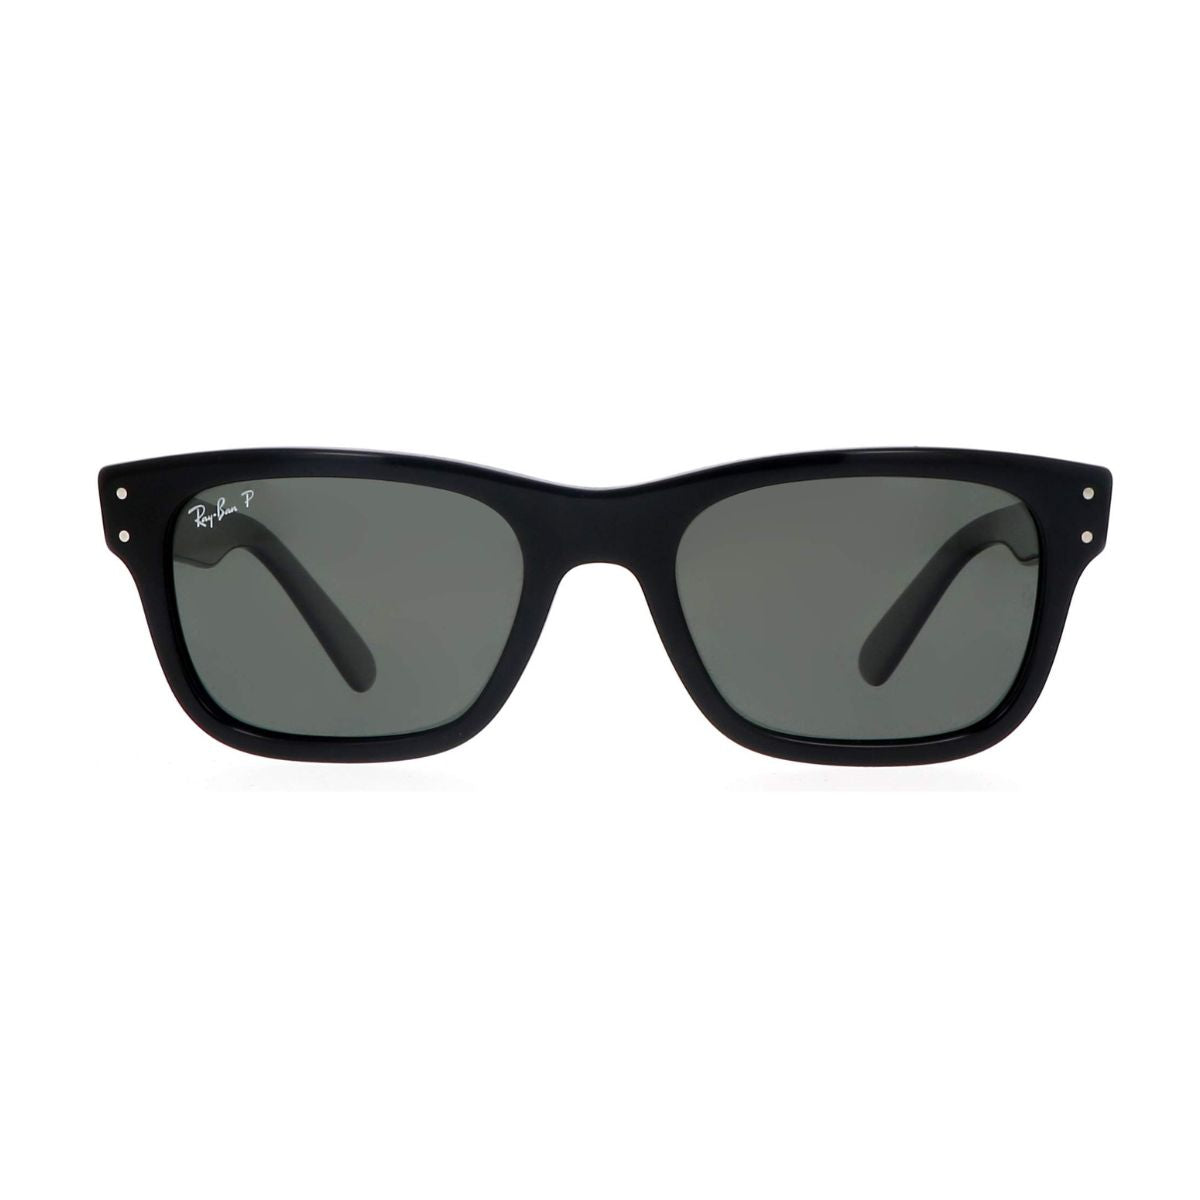 "Buy Rayban 2283 901/58 Square black sunglasses with UV Protection For Men's At Optorium"
